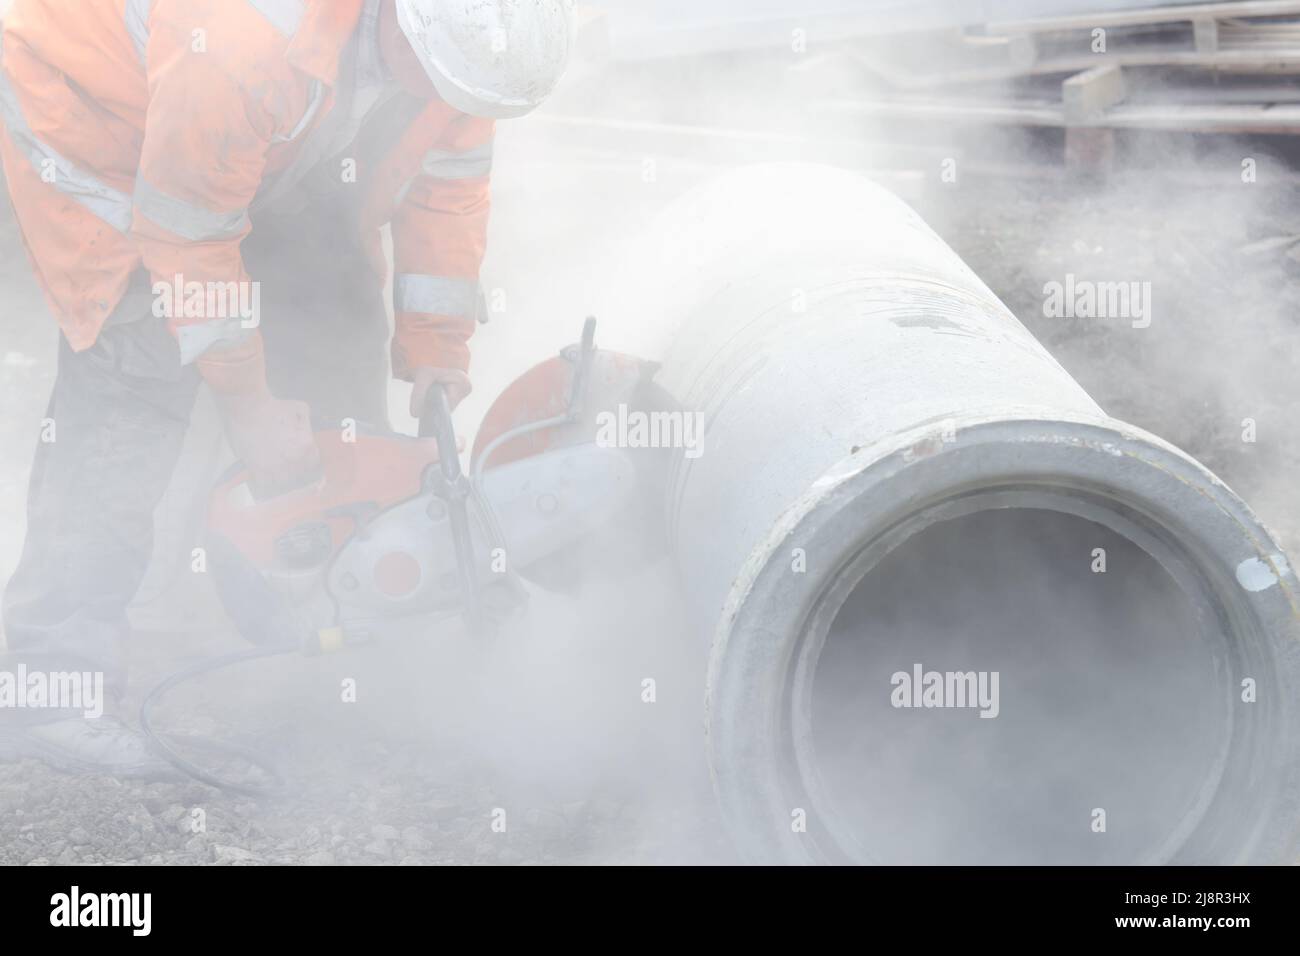 A worker at the construction site cutting a concrete drainage pipe with concrete cutter.Builder covered in a harmful dust cloud as safety procedure br Stock Photo